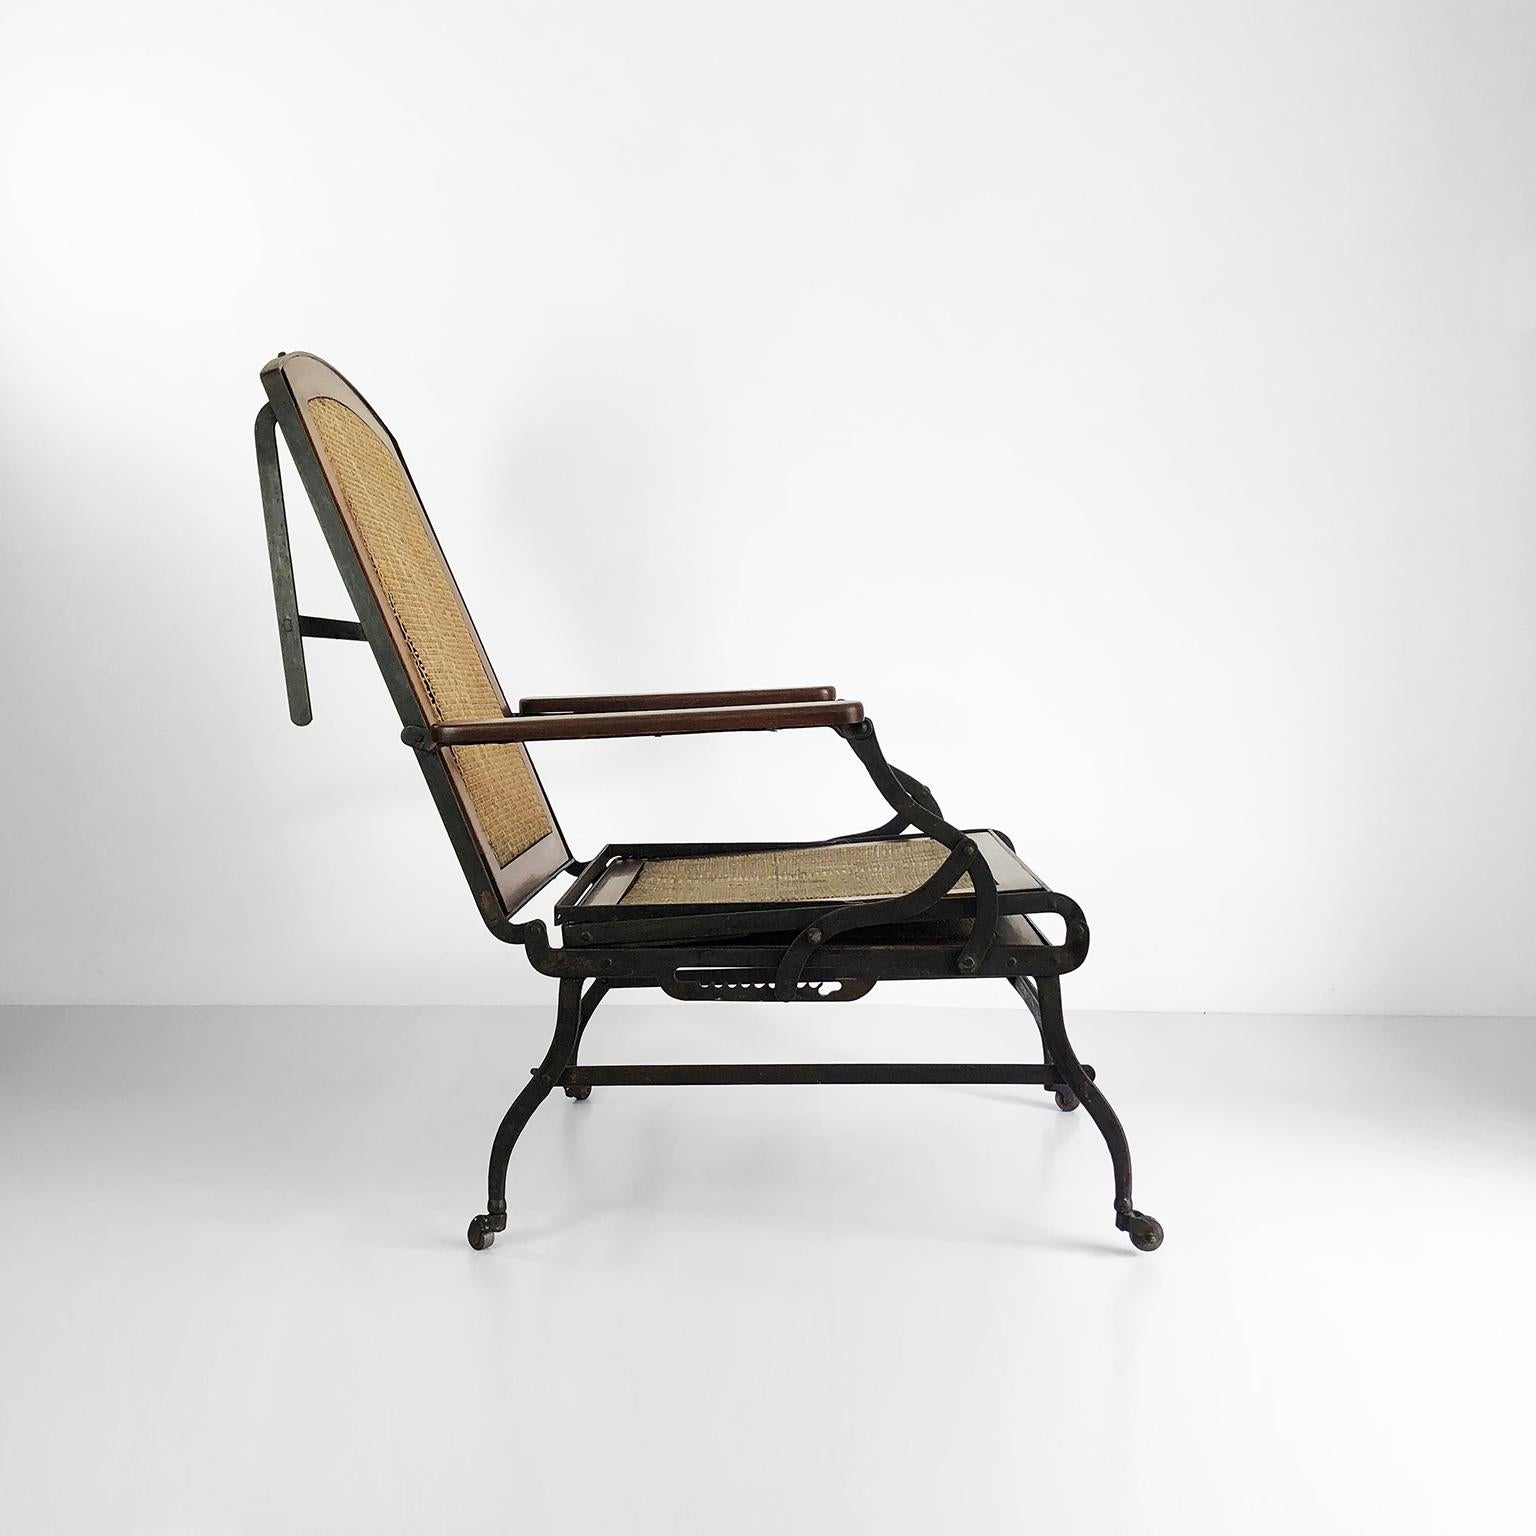 American Chaise Lounge Daybed 19th Century Industrial Style